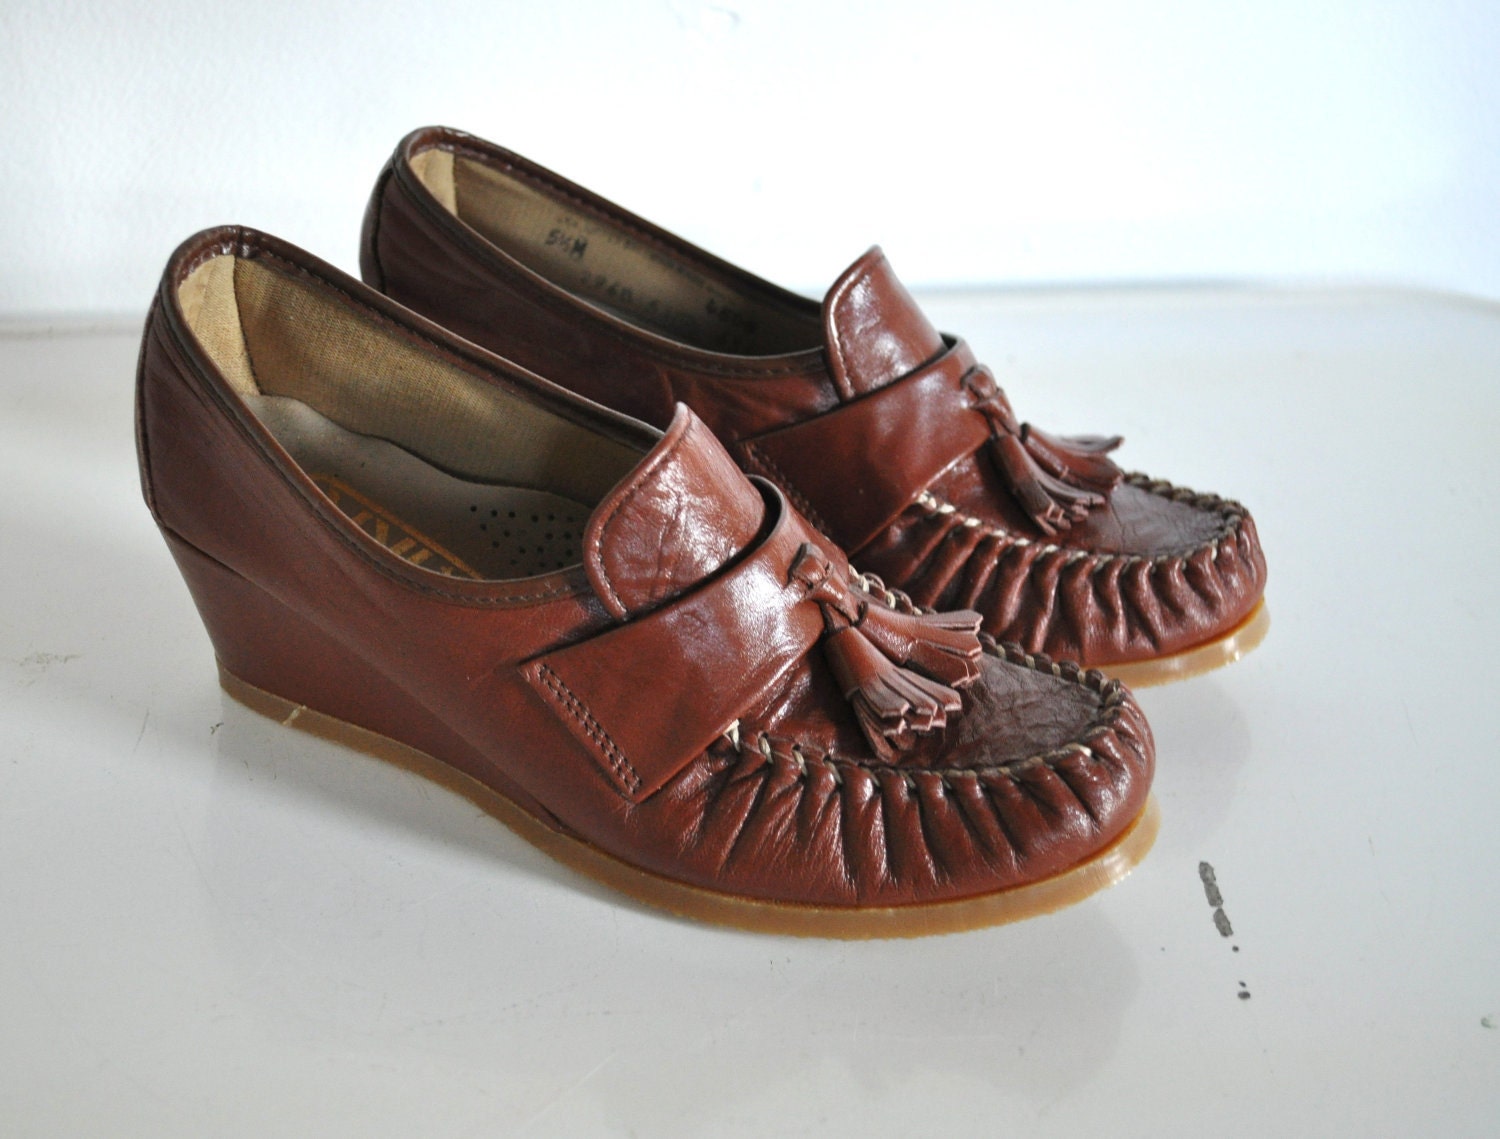 Vintage Wedge Loafers Size 5 1/2